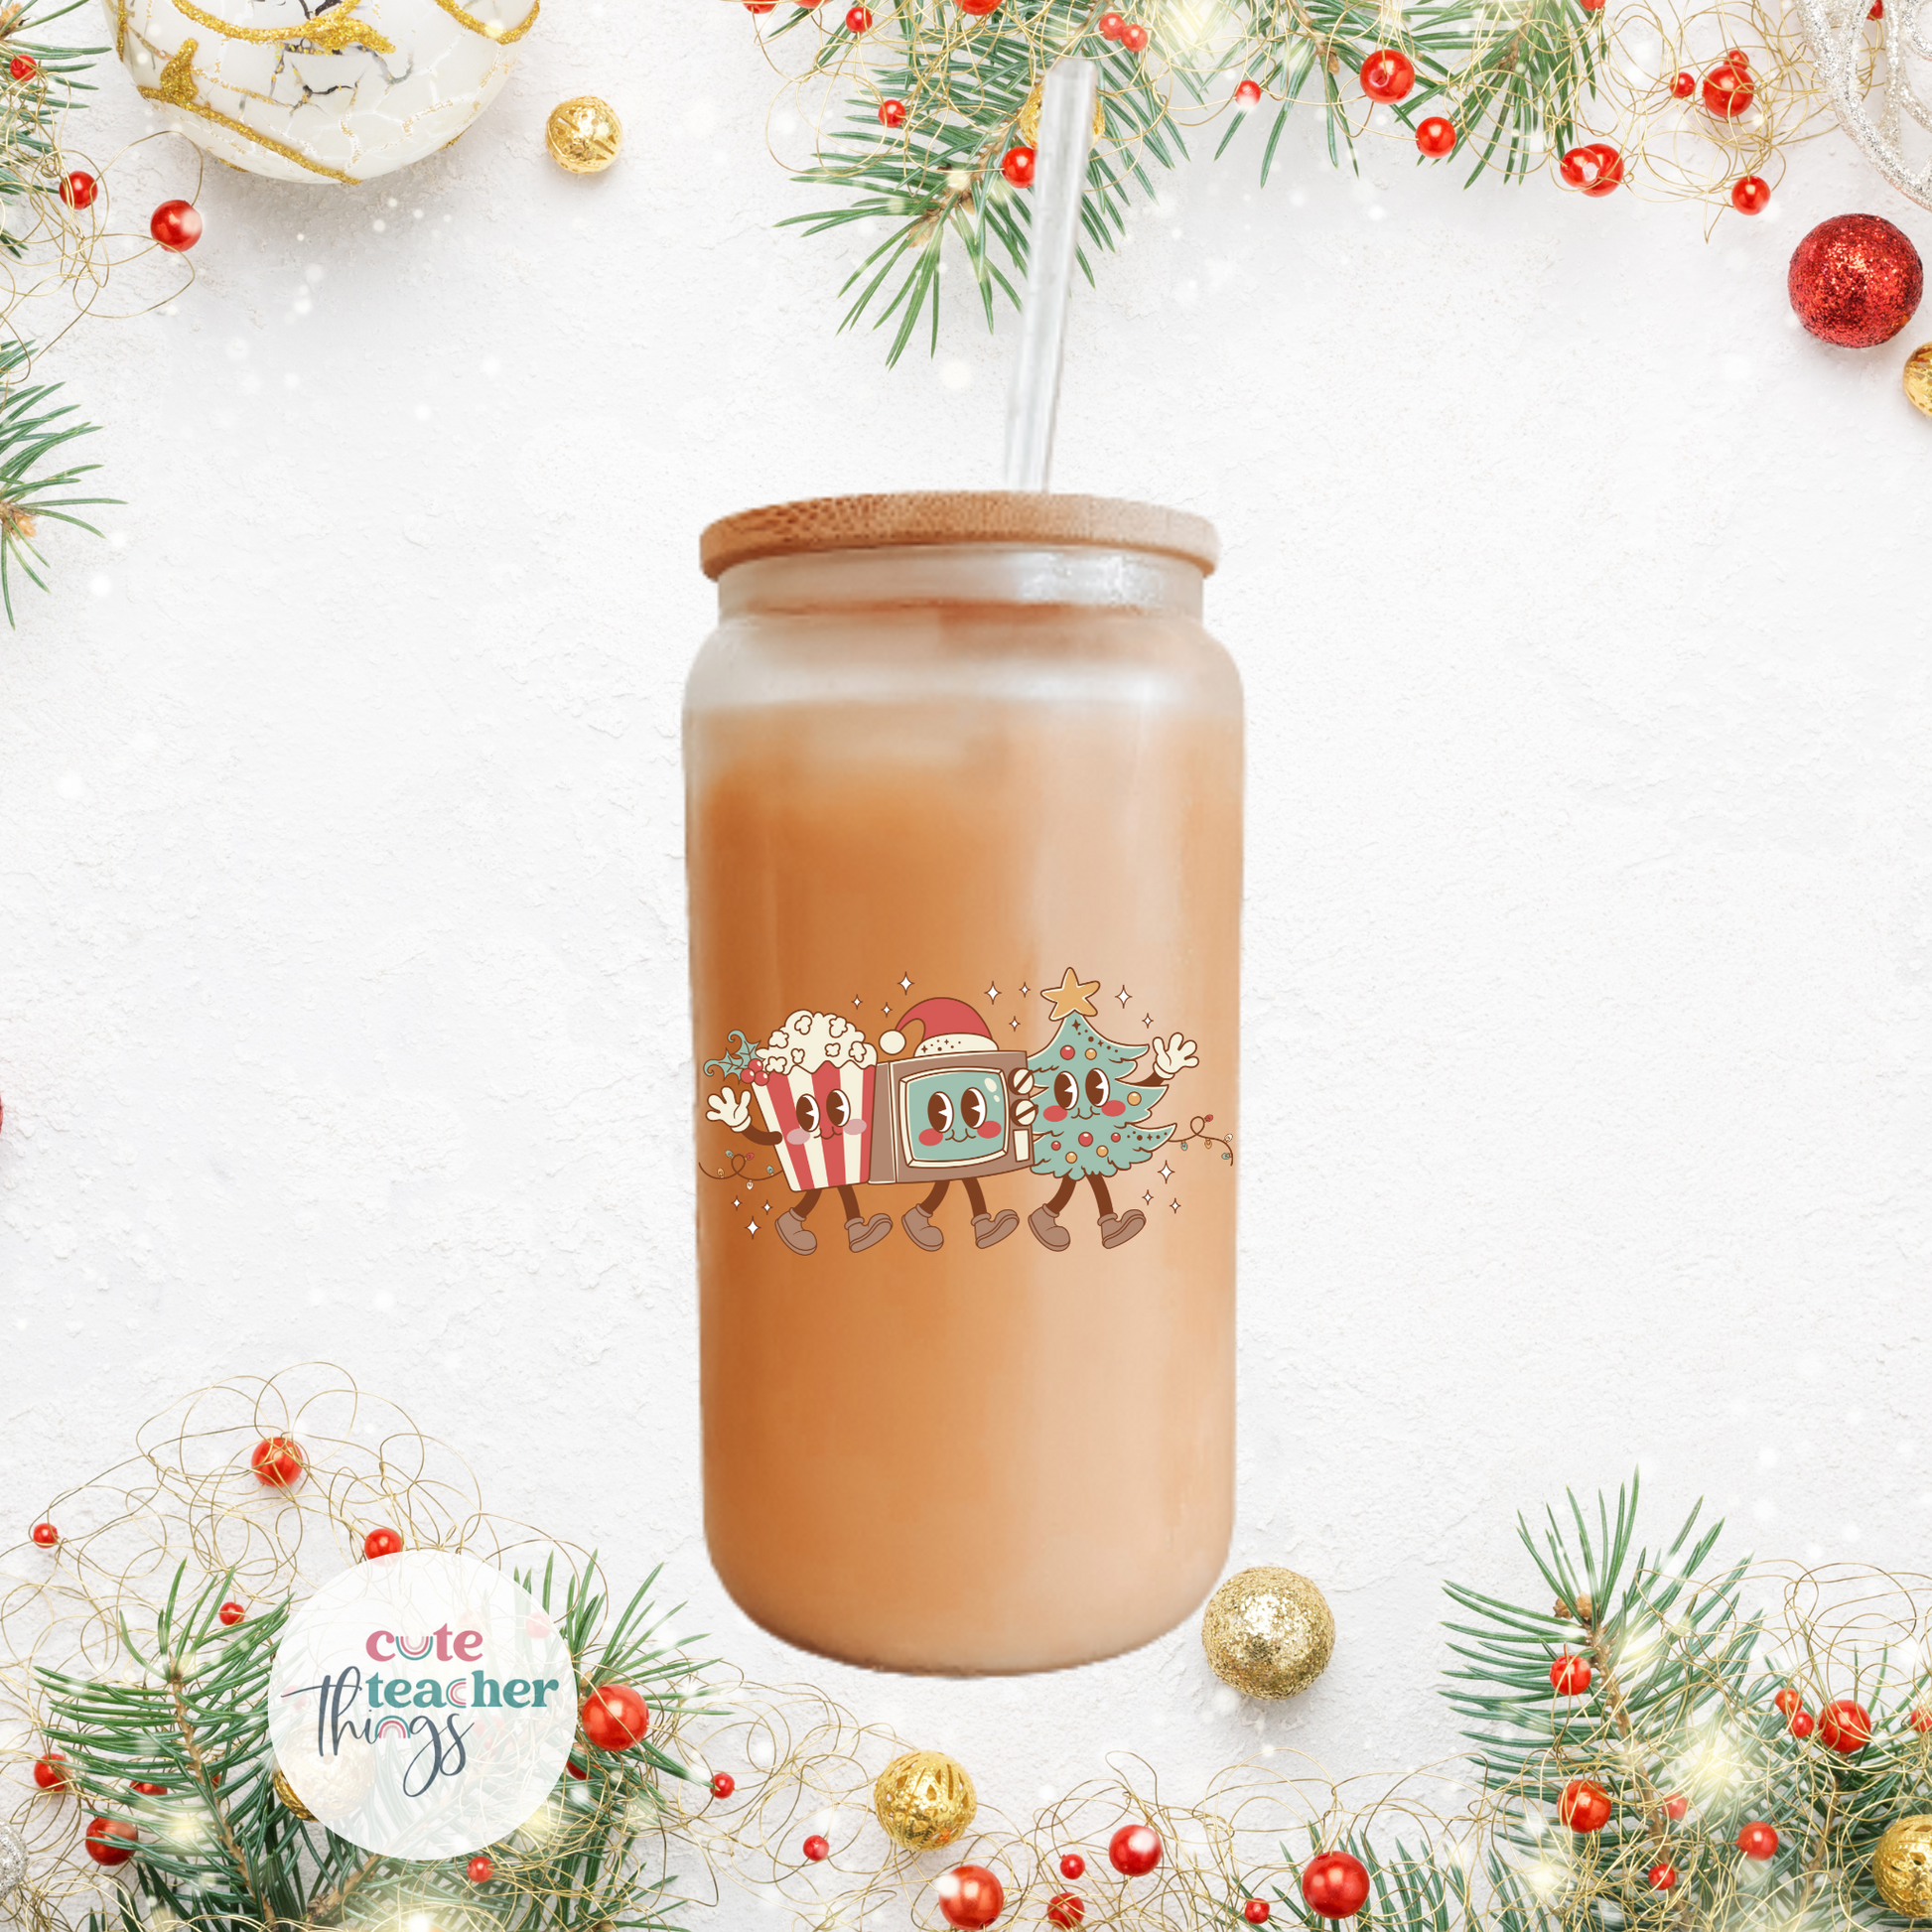 16 oz size, With anti-spill bamboo lid and easy to sip plastic straw, 